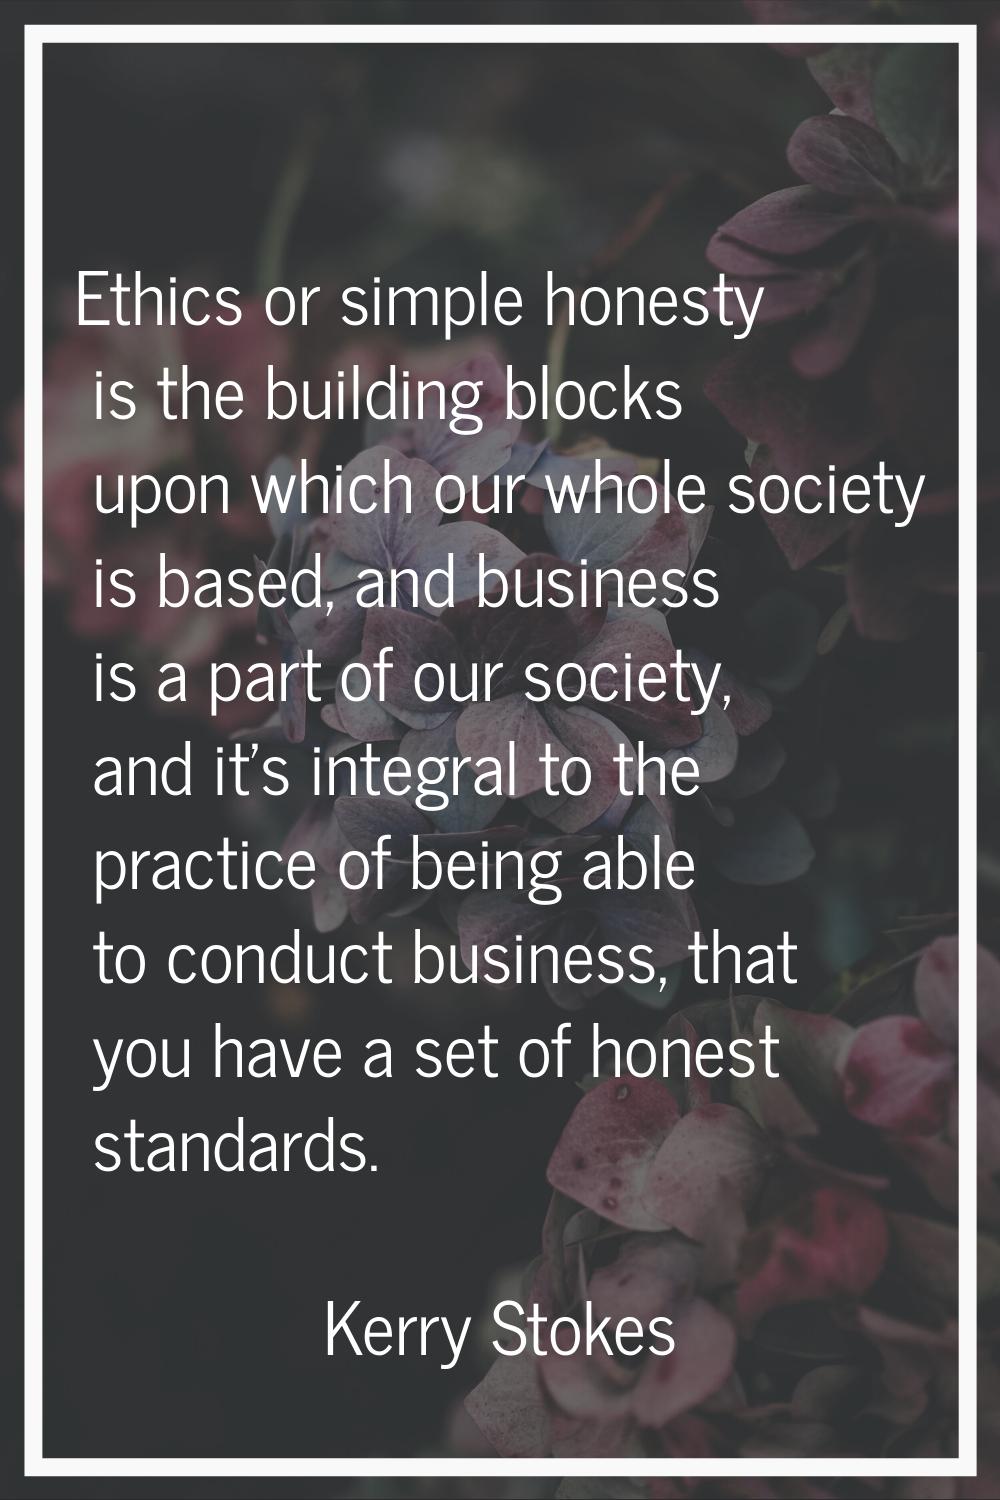 Ethics or simple honesty is the building blocks upon which our whole society is based, and business